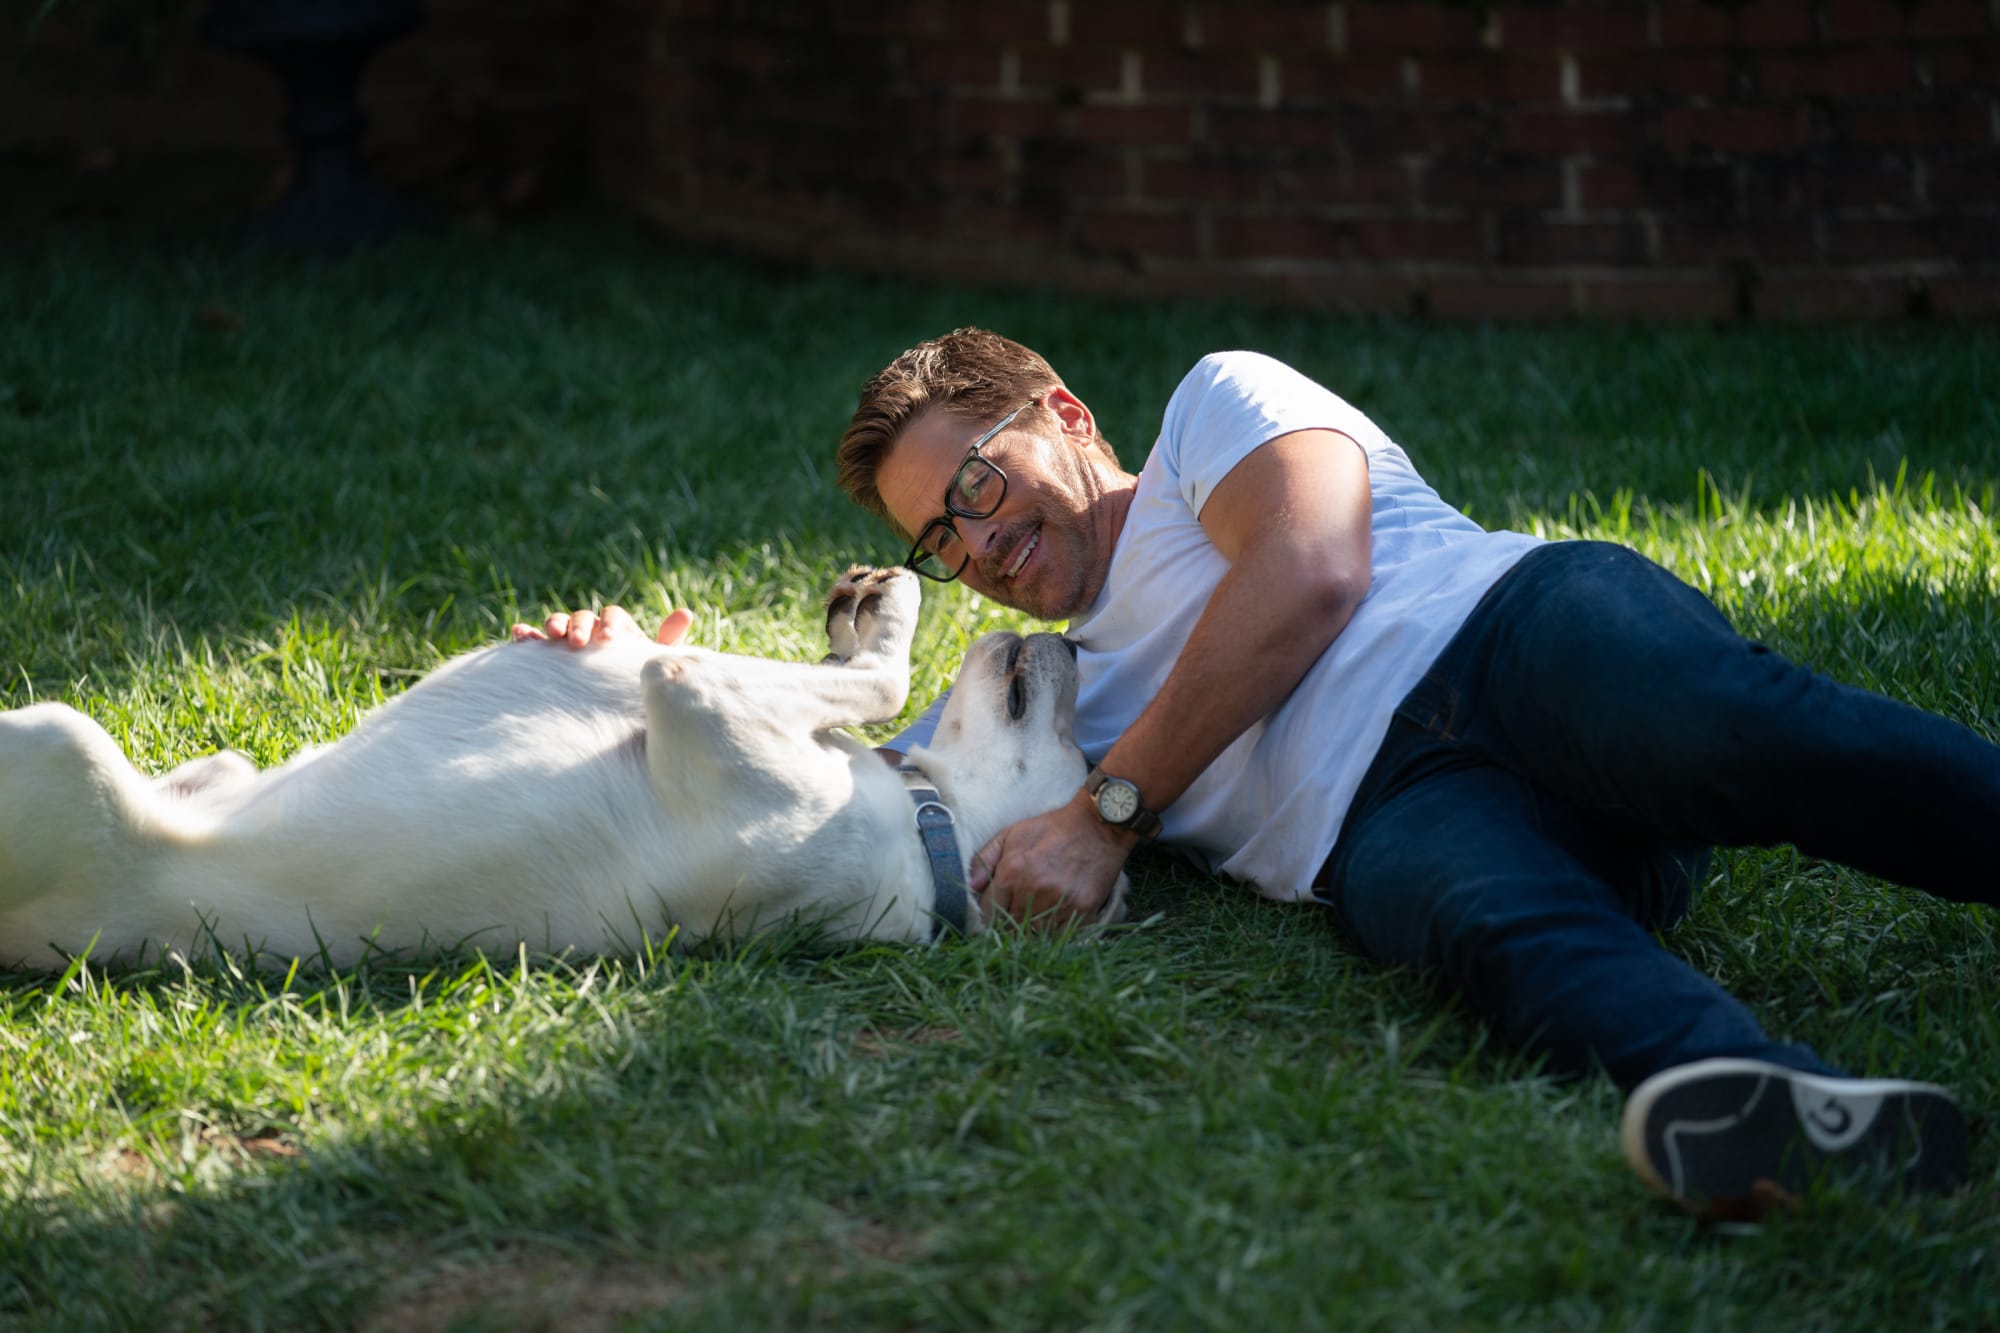 Dog Gone Starring Rob Lowe Release Date, Cast, Synopsis, Trailer and More

+2023